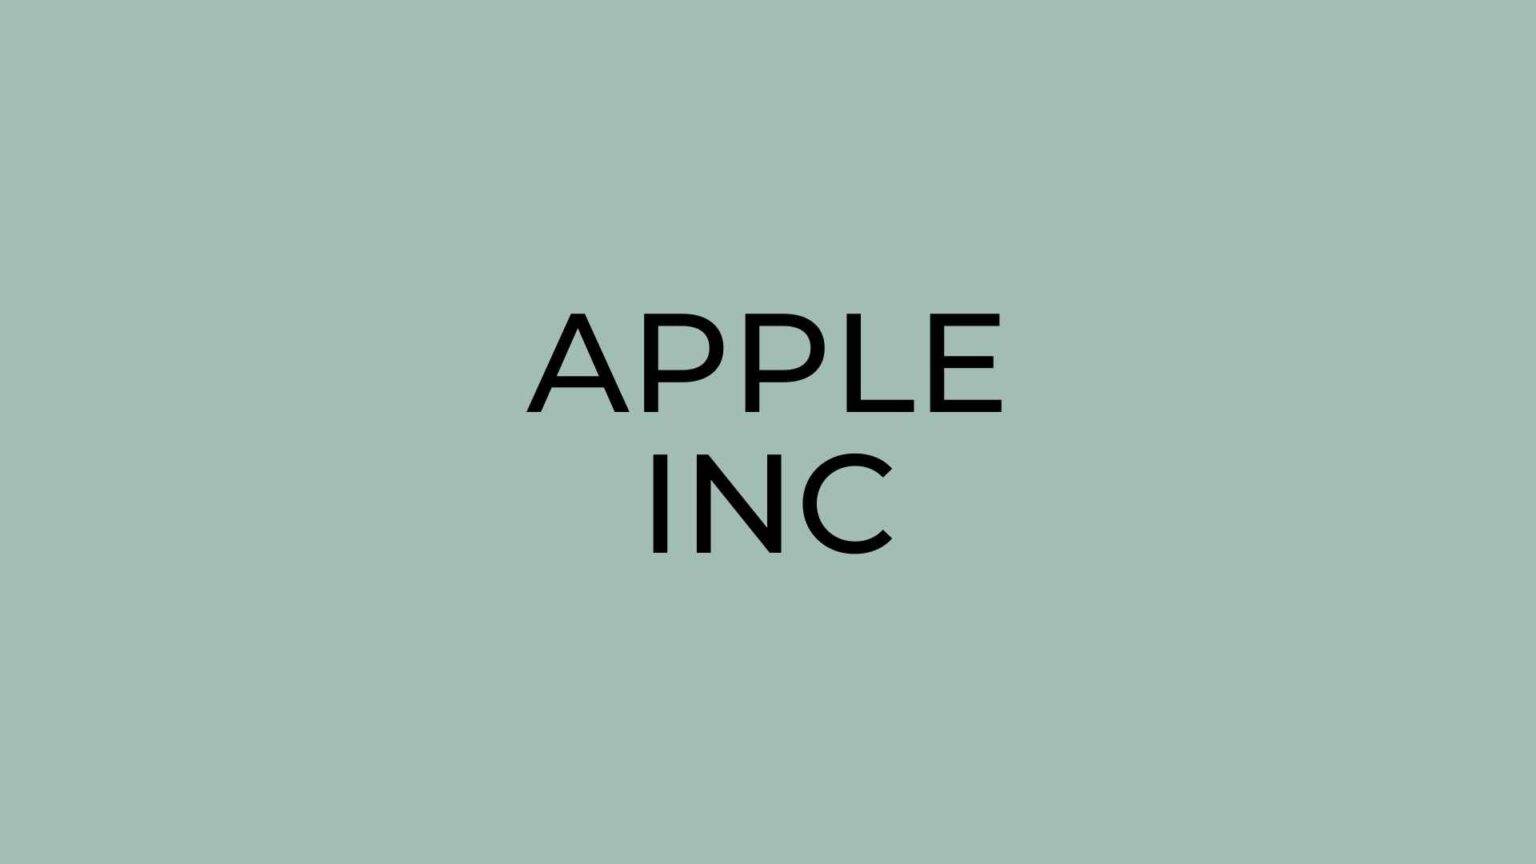 Apple price today 7.27+0.31 (+0.23%) – 2 July 21